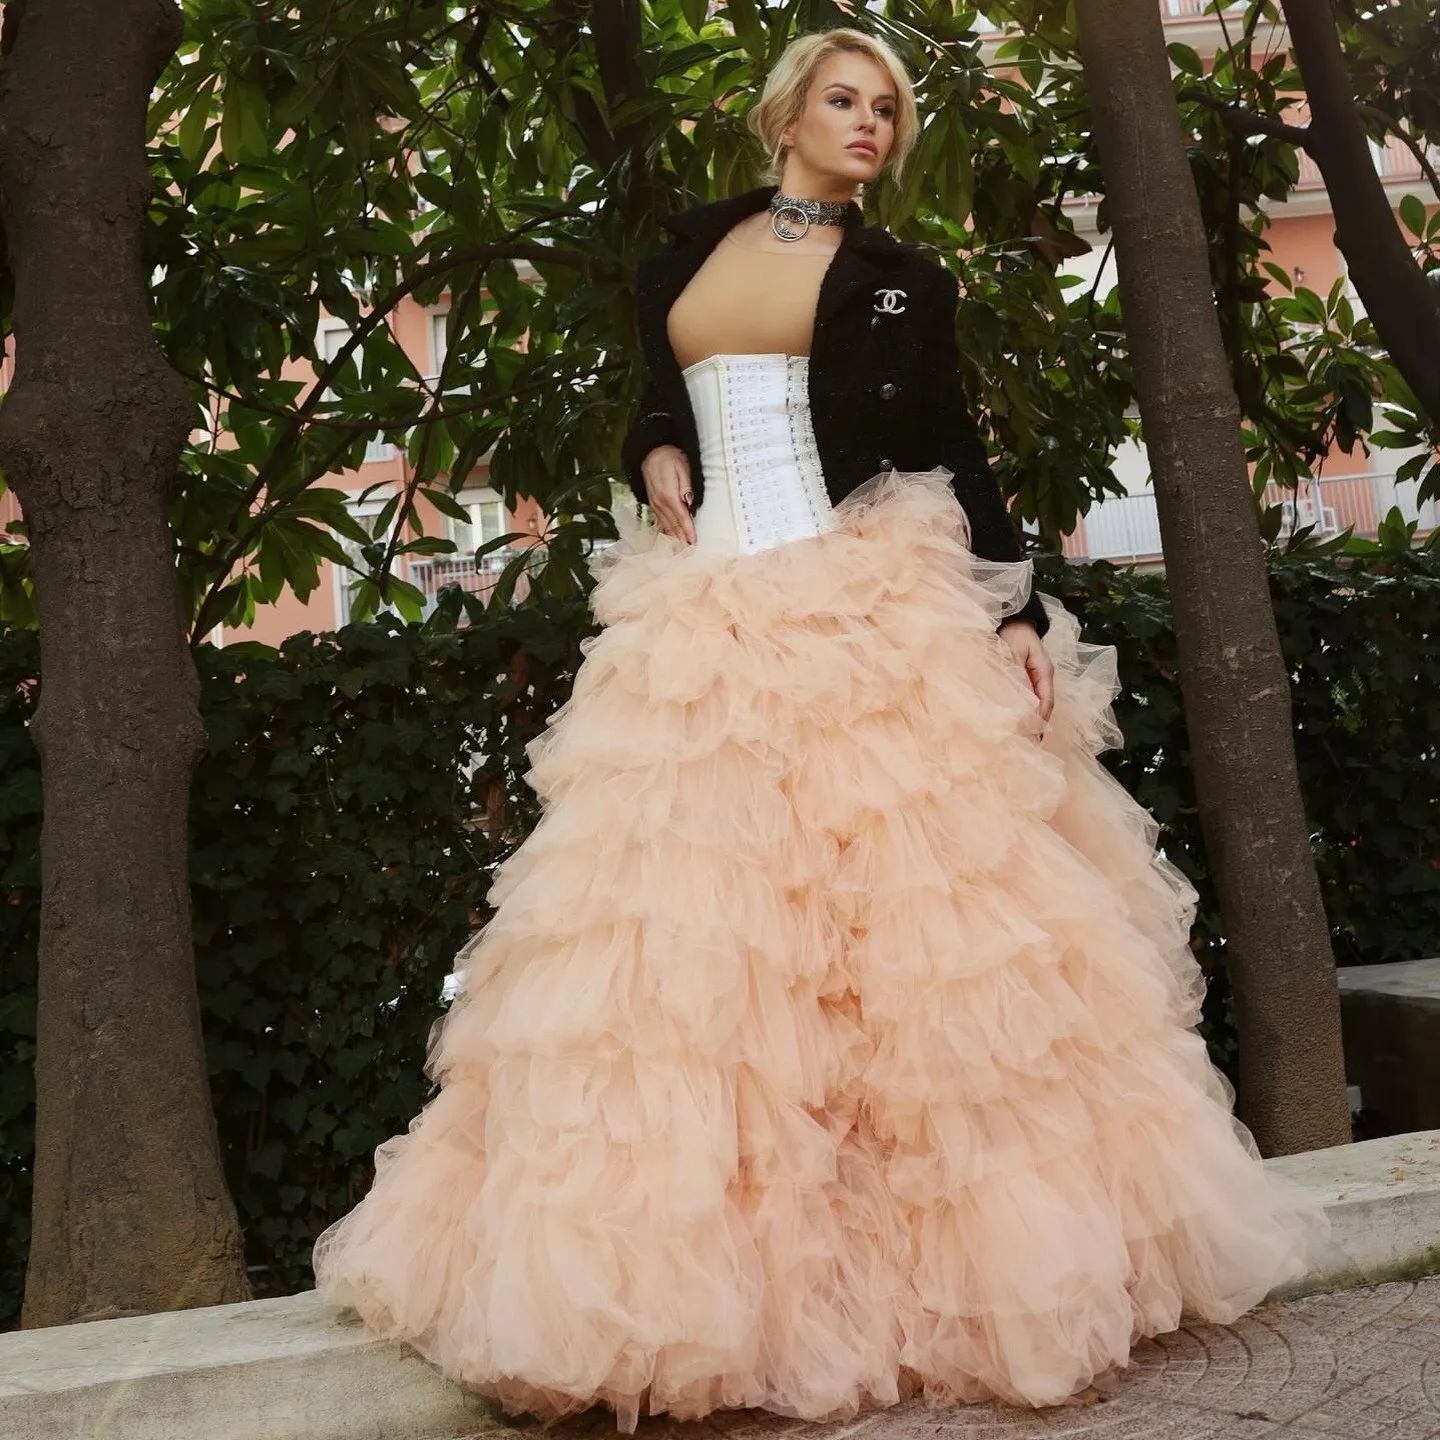 

Amazing Peach Fluffy Tiered Long Tulle Women Skirts To Party Big Volume Tutu Tulle Women Maxi Skirt Bridal Wedding Skirt